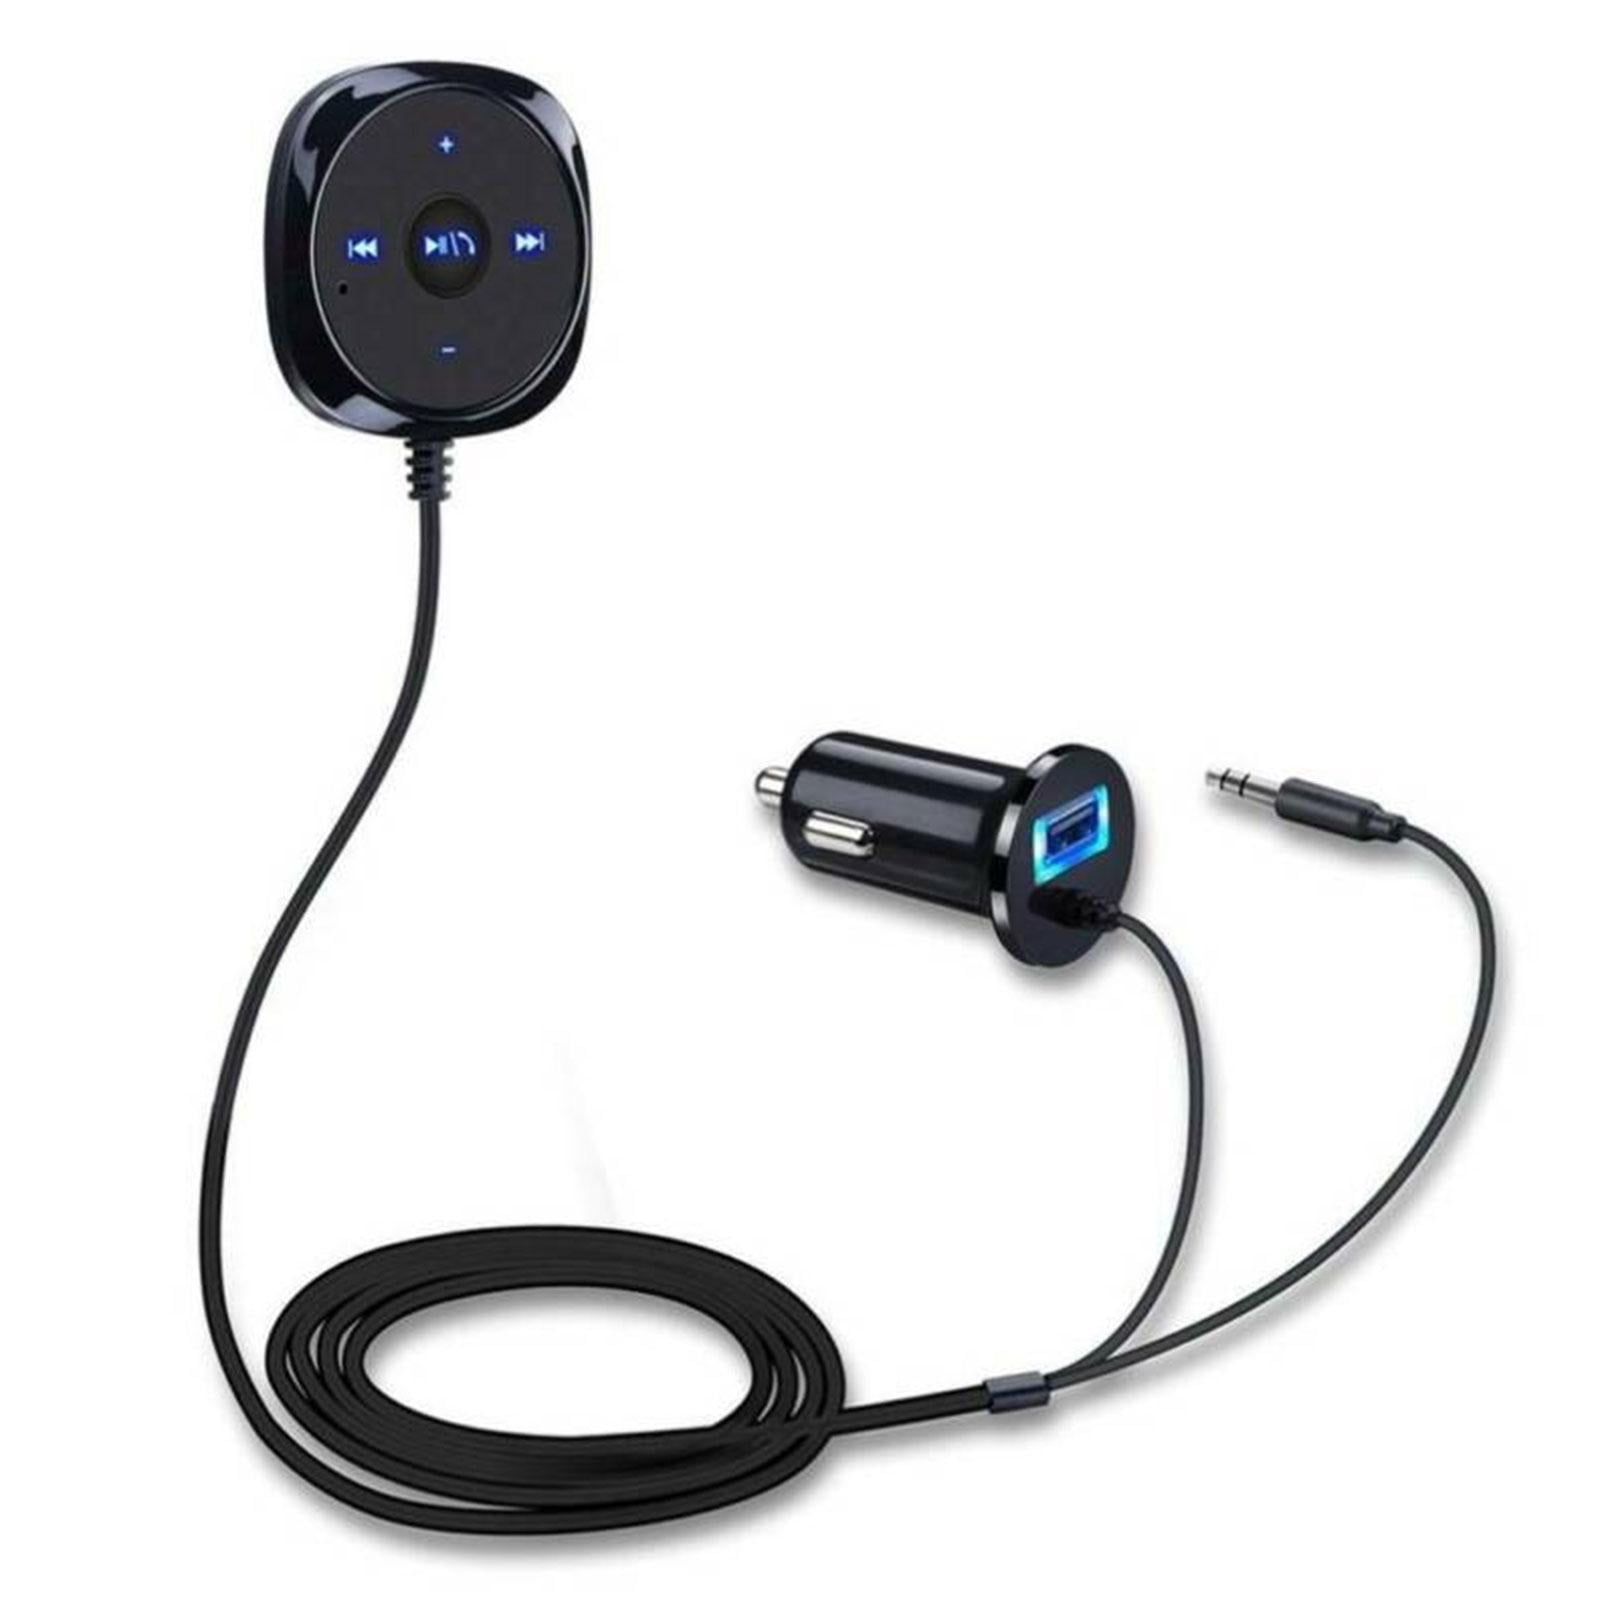 Bluetooth Audio Receiver Car MP3 Players AUX Adapter USB Charger V9R7 